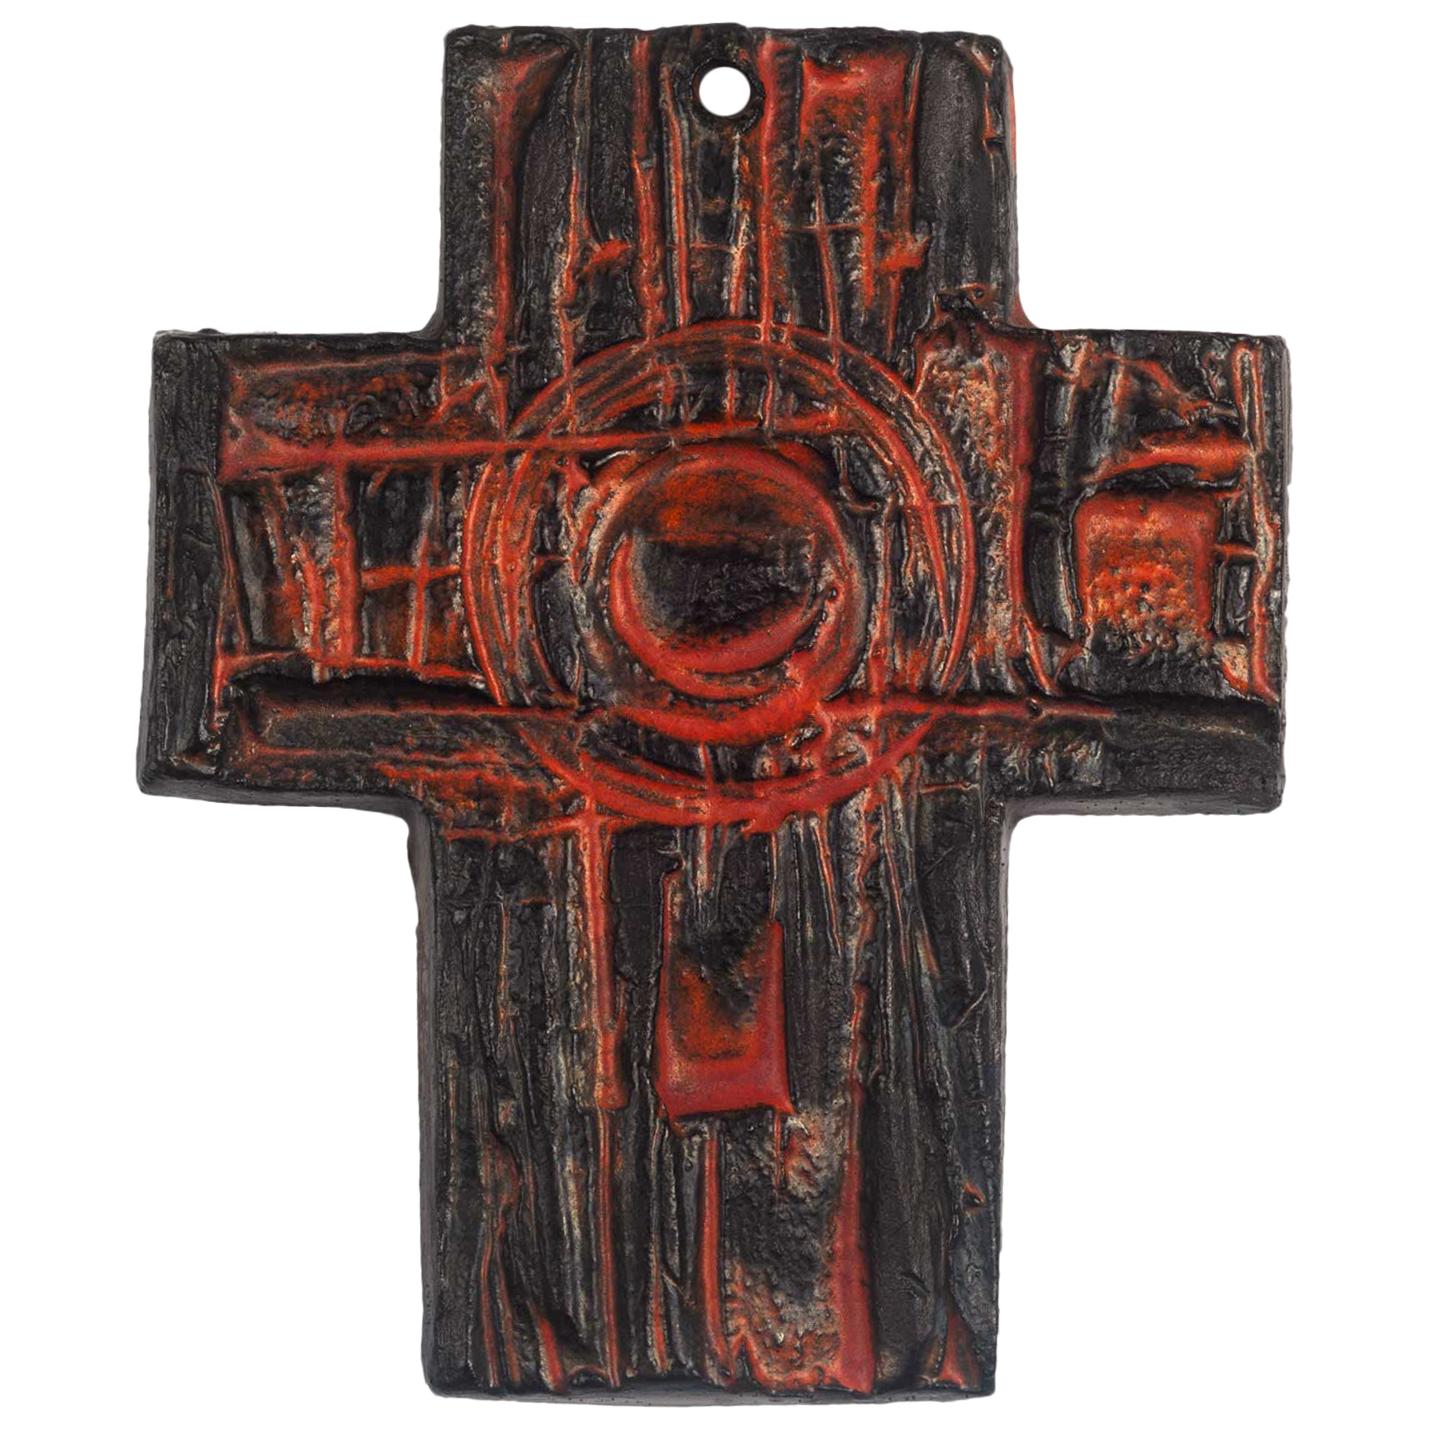 Midcentury European Wall Cross, Hand Painted Textured Ceramic, 1970s For Sale